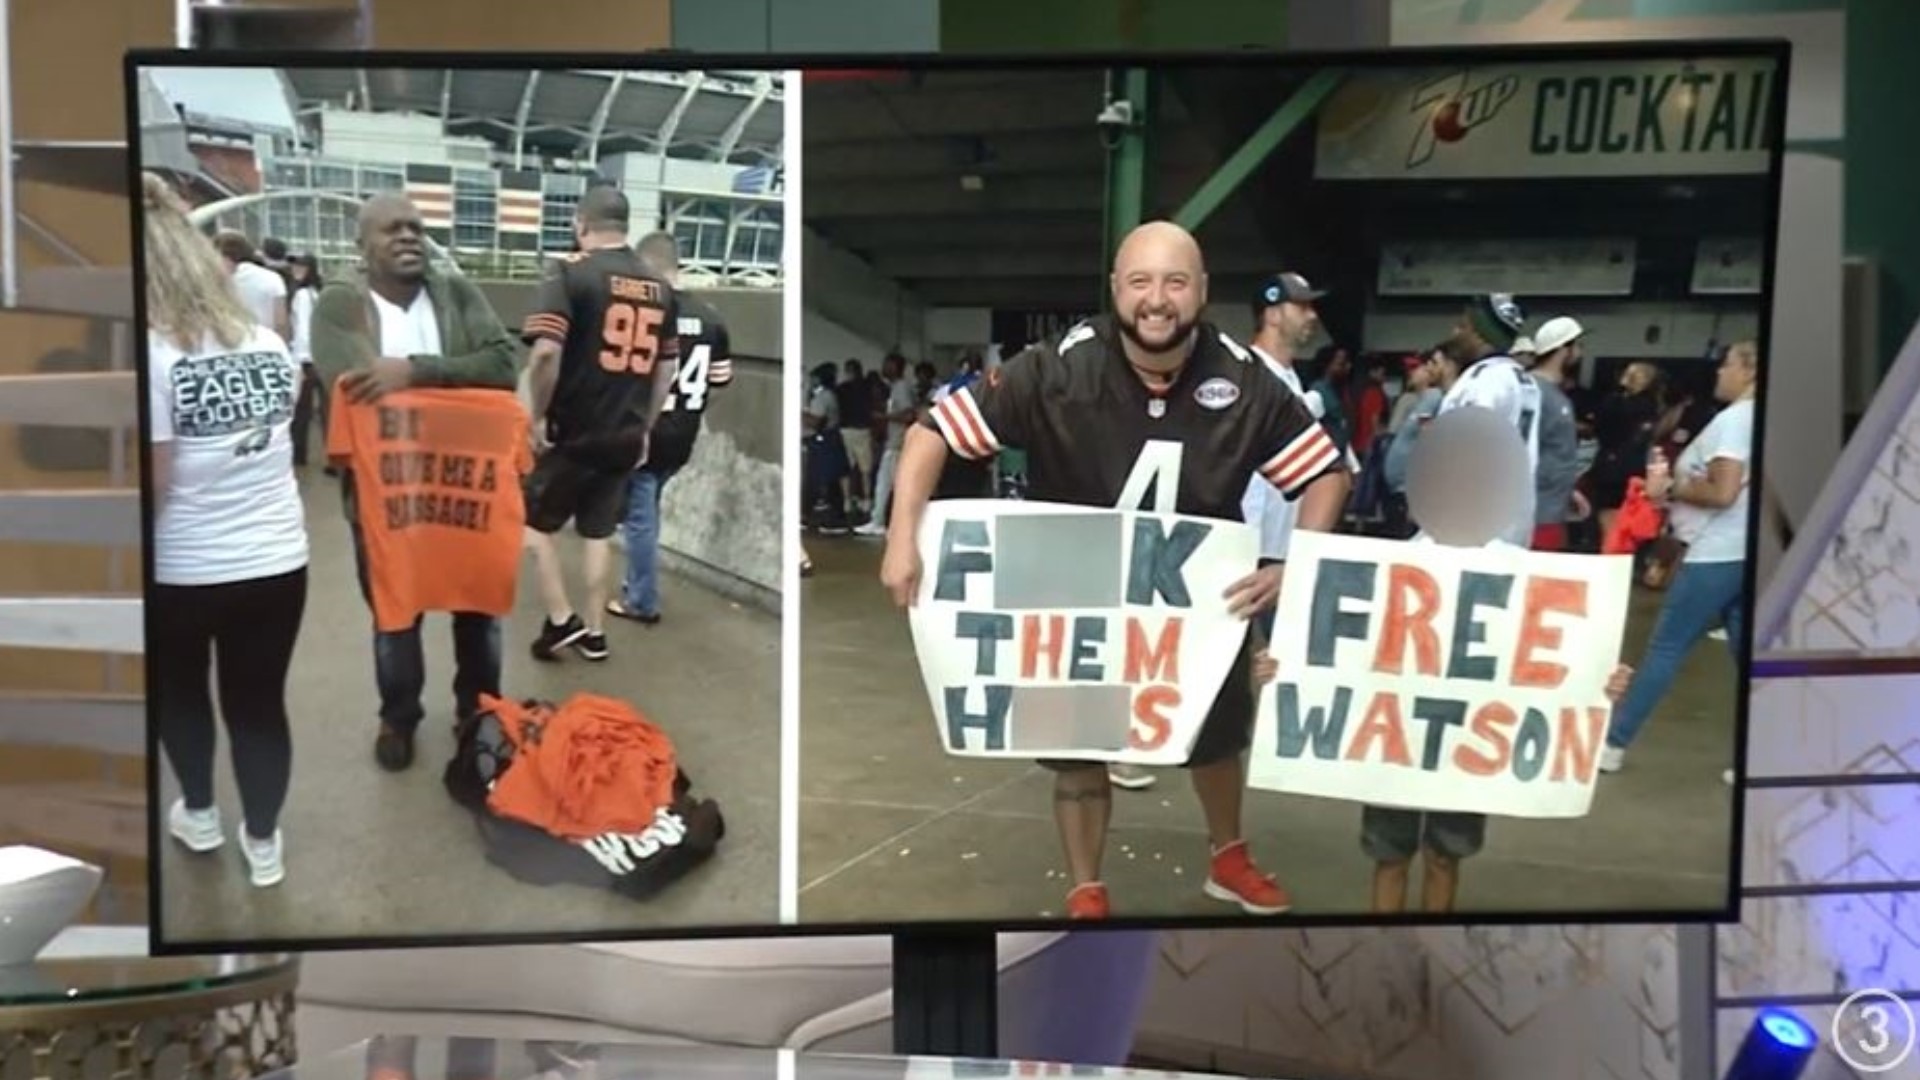 Mike Polk Jr. on why Browns fans shouldn't accept offensive signs